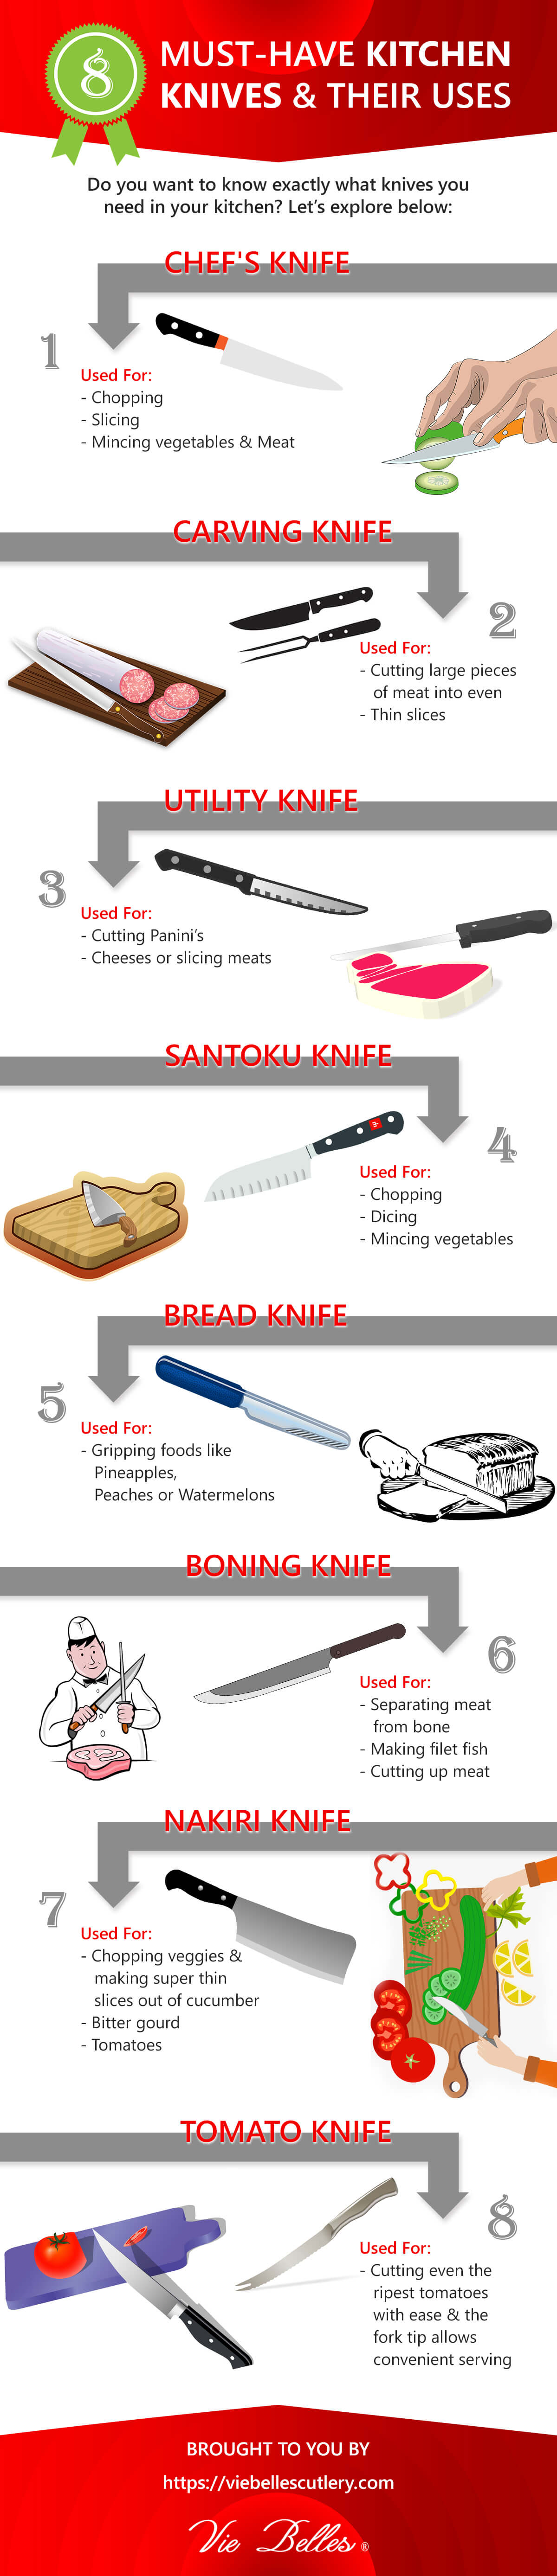 Must-have kitchen knives and their uses